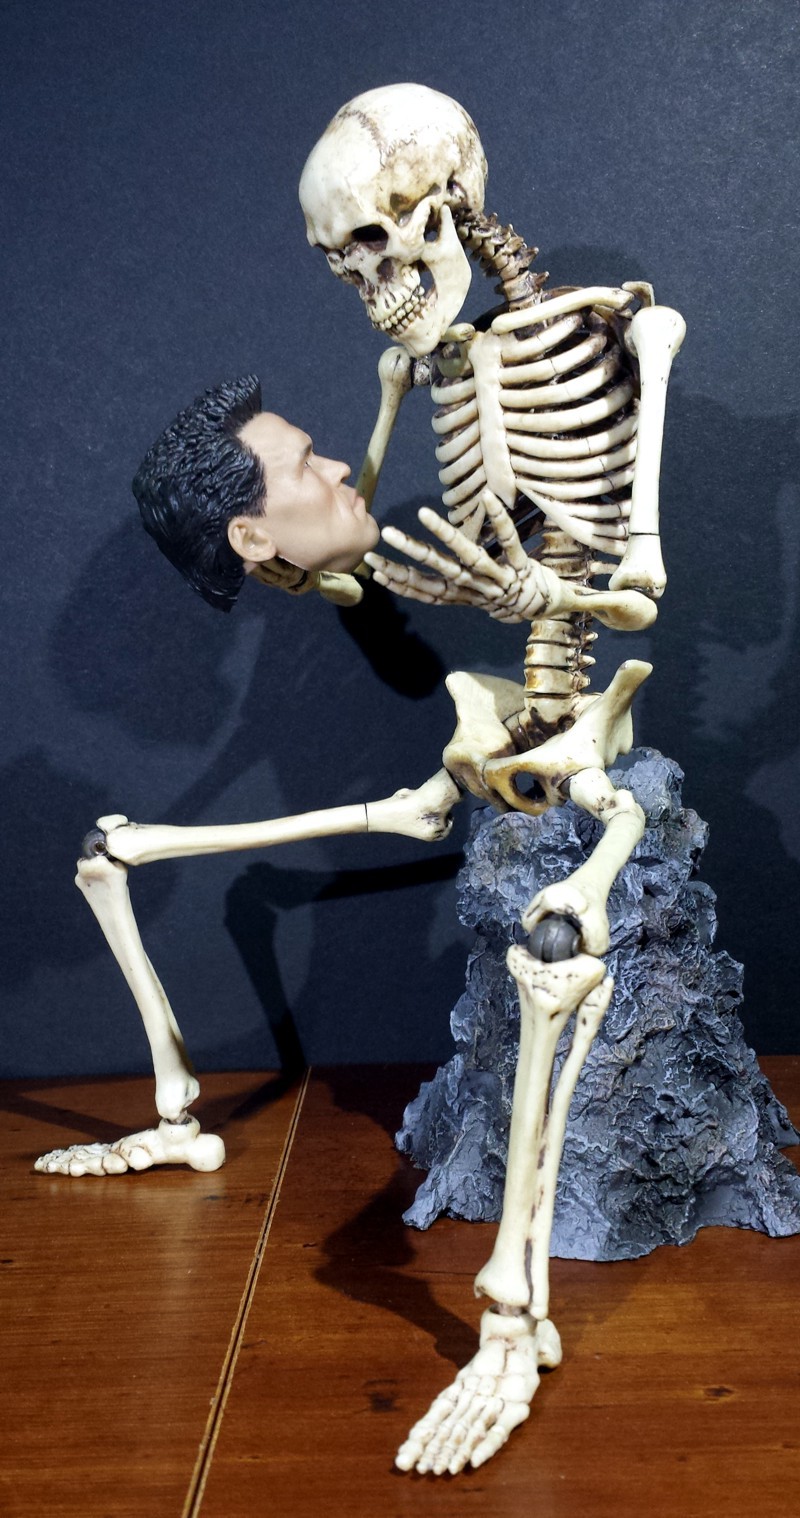 Human Skeleton sixth scale action figure by COO/COOMODEL